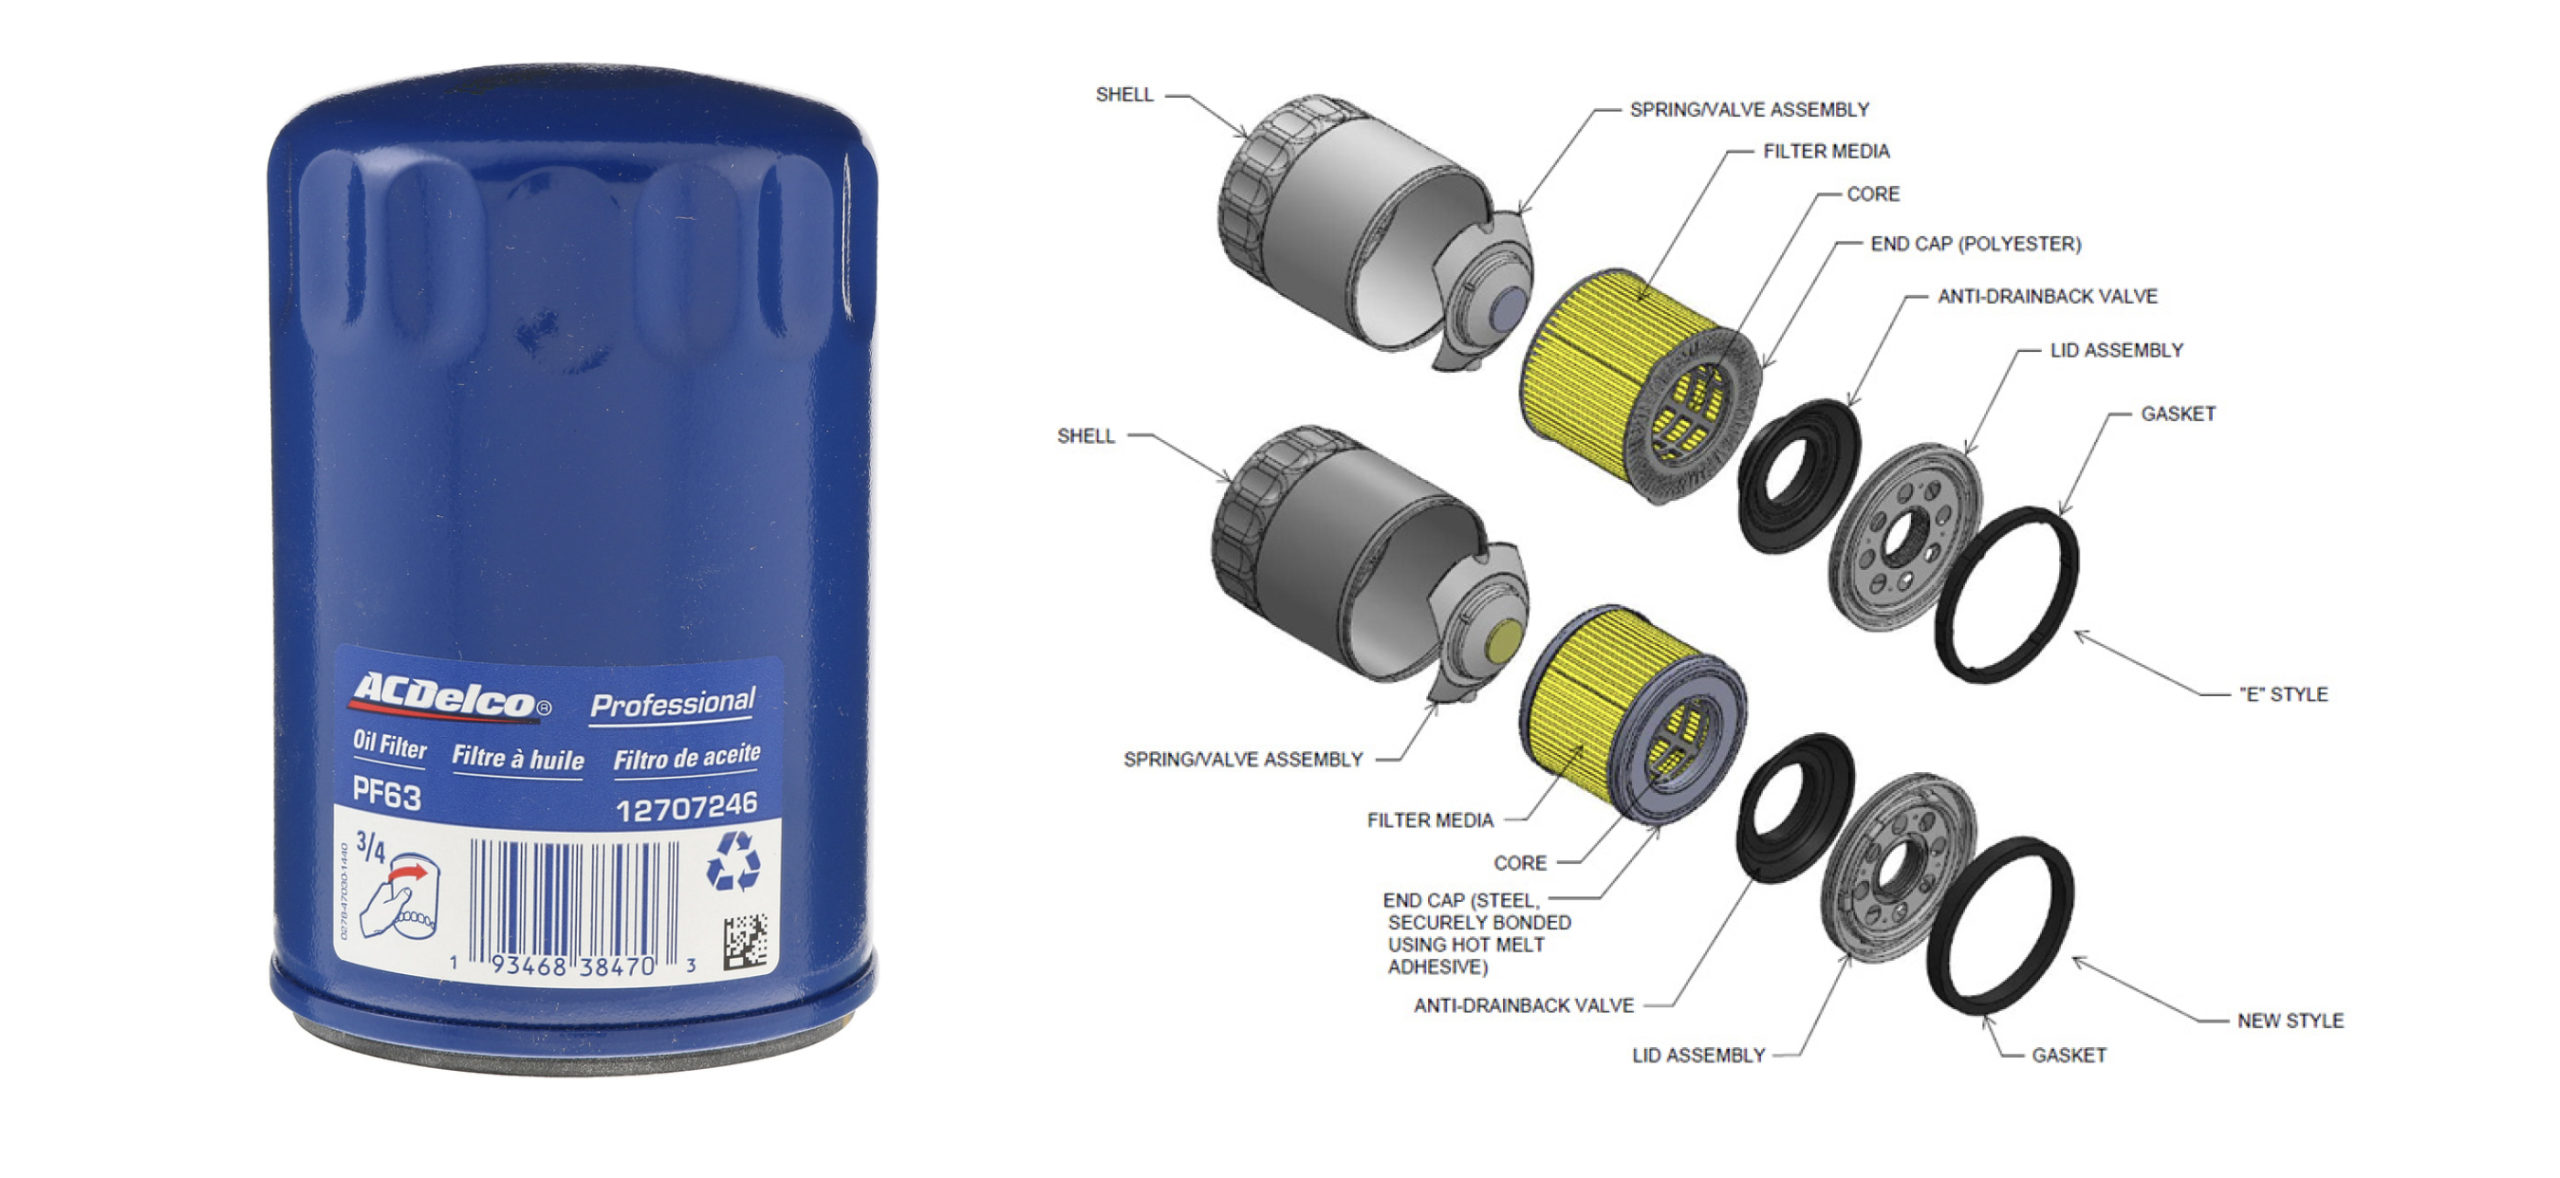 NEW ACDELCO OIL FILTERS DELIVER Quality PERFORMANCE – GM Service Insights